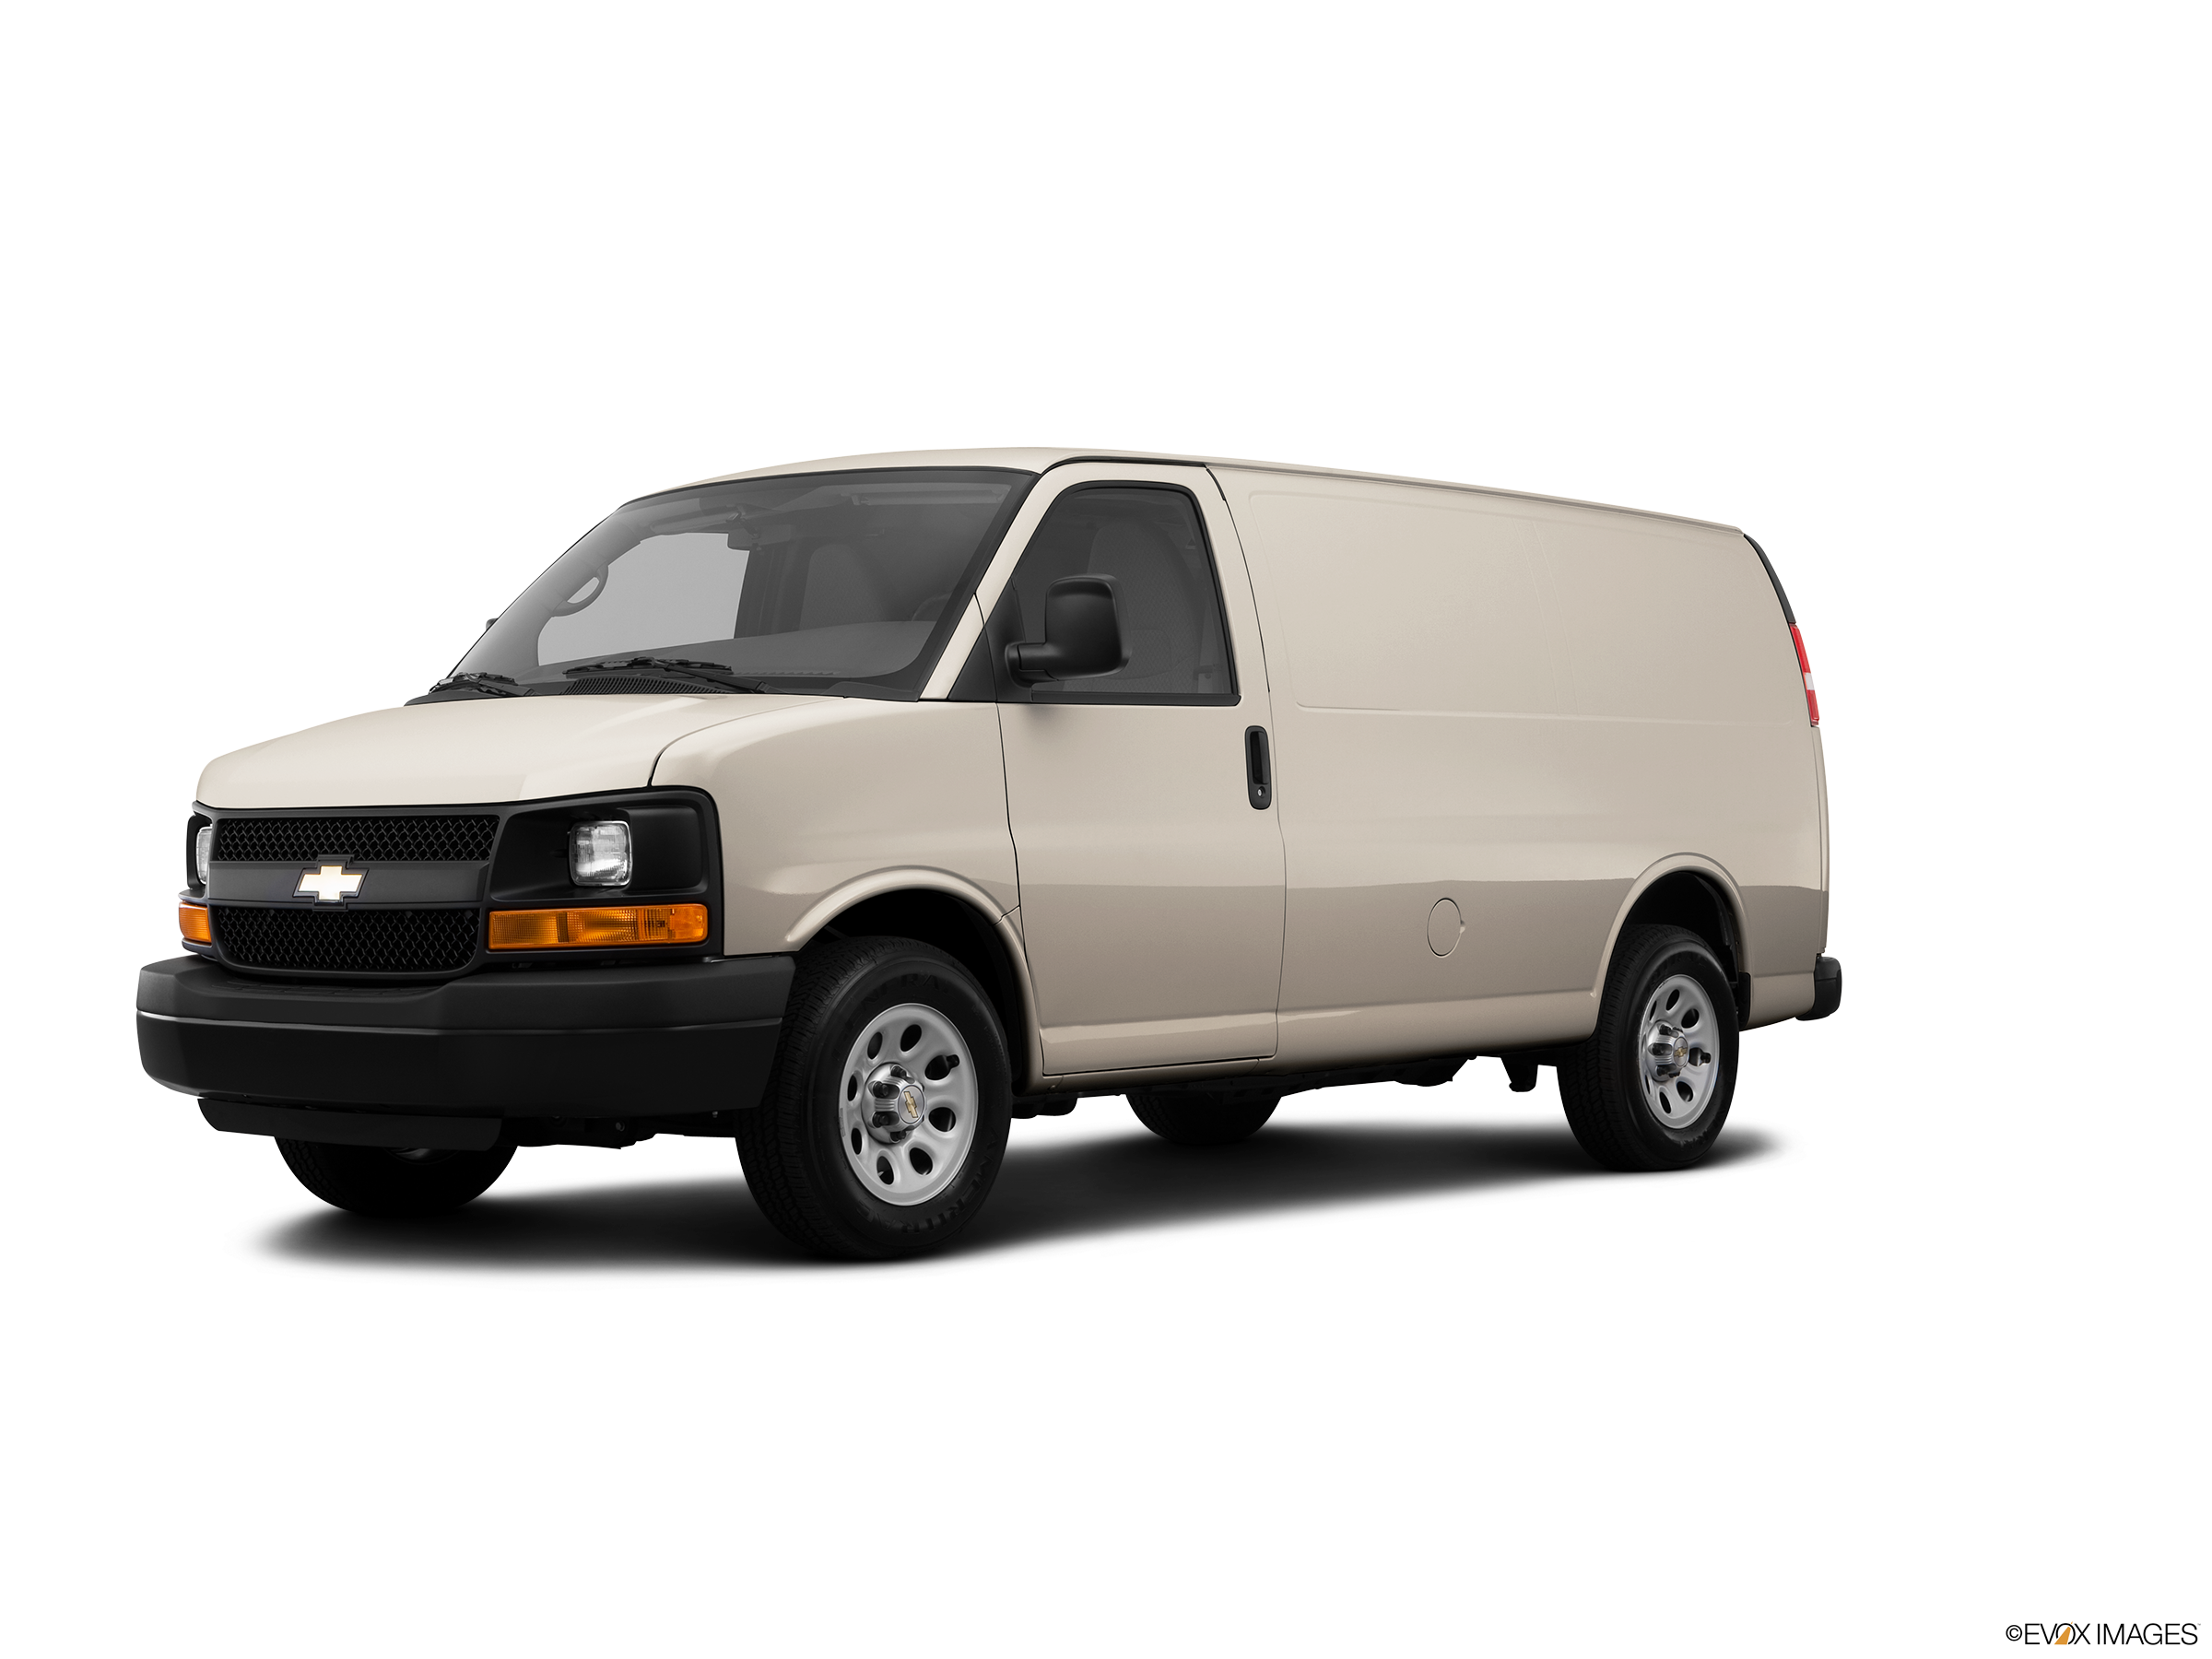 2013 Chevy Express 1500 Cargo Values & Cars for Sale | Kelley Blue Book